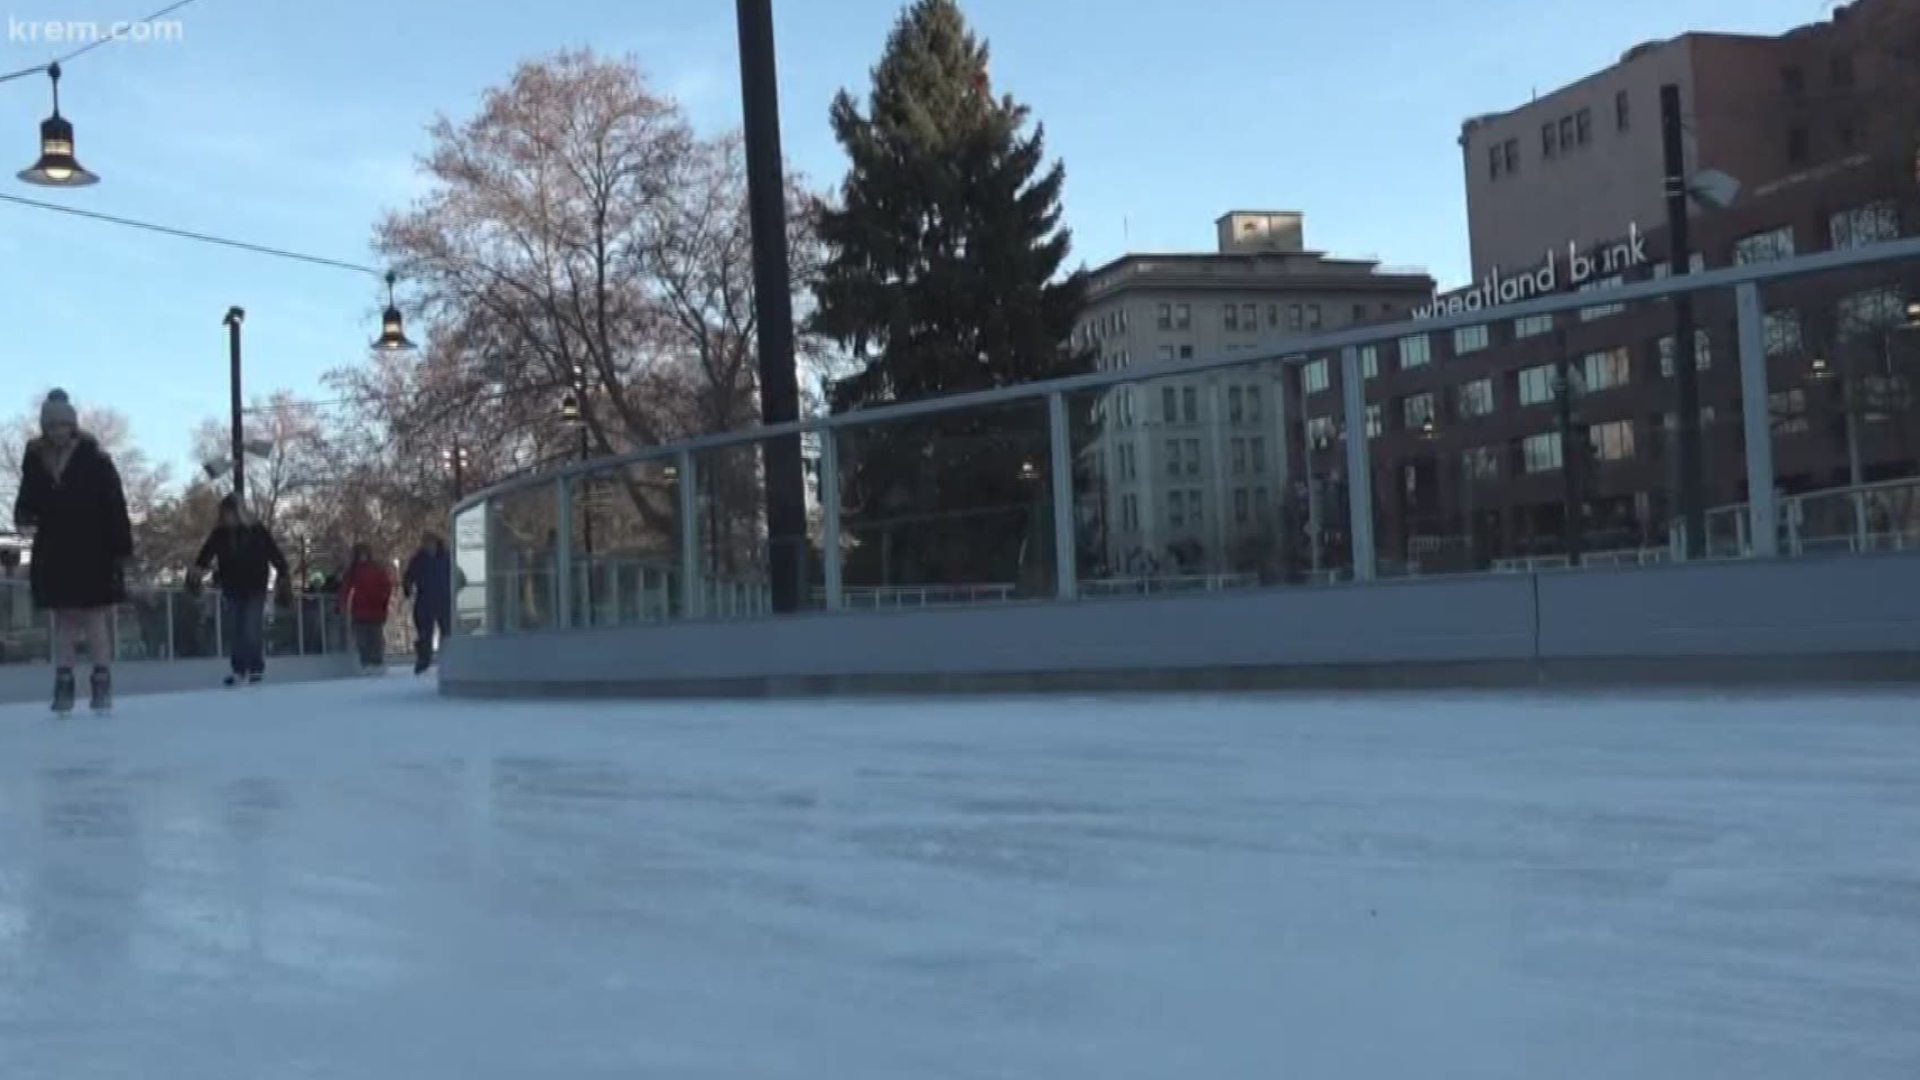 The Skate Ribbon officially opened on December 8, 2017.  It was a unique attraction Spokane shared with just a handful of other cities in the nation. In the first nine days of being open the ribbon had 11,195 visitors. The first month there were even more skaters.